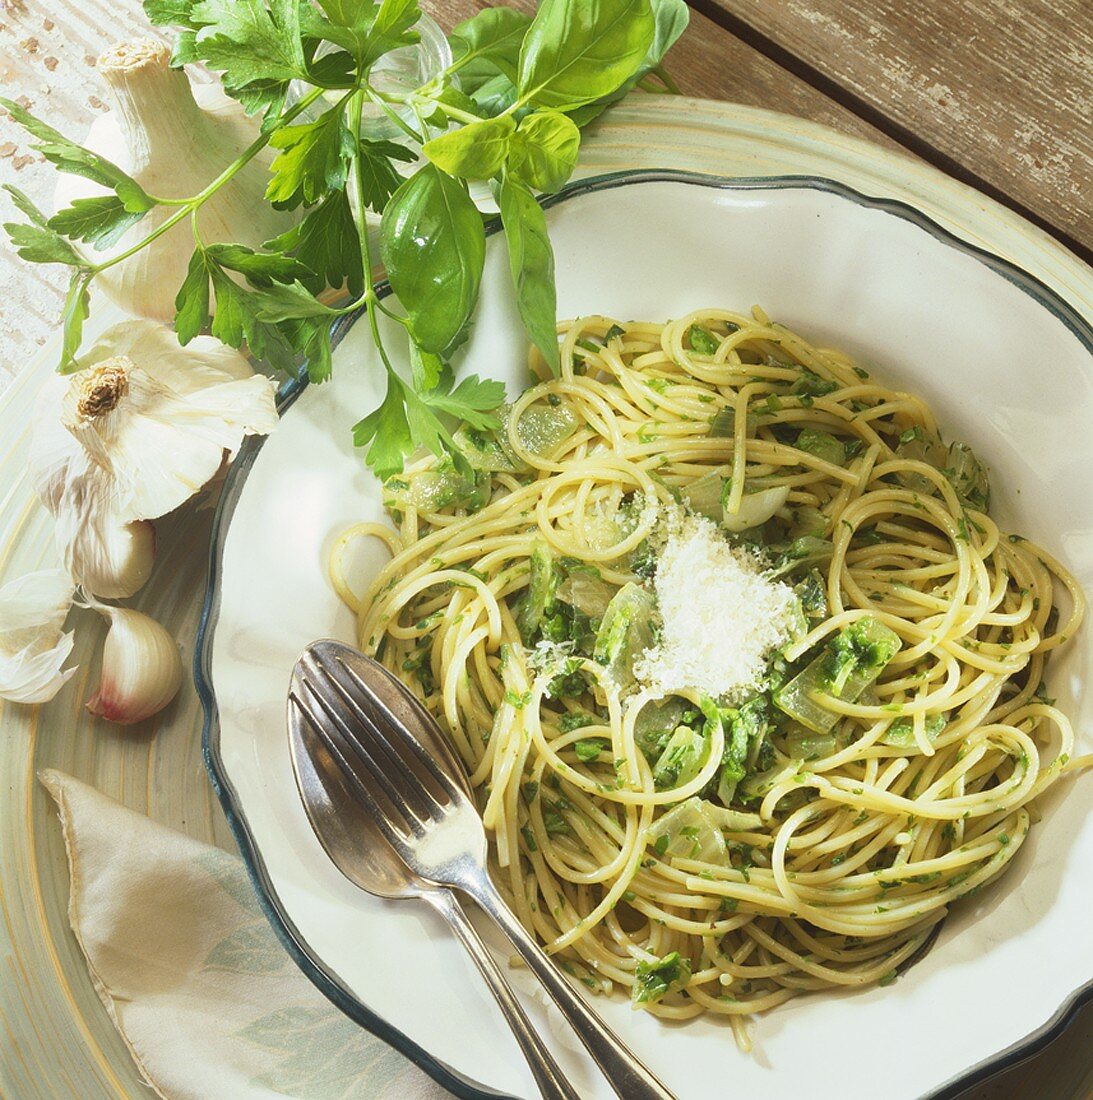 Spaghetti with garlic, onions and parsley